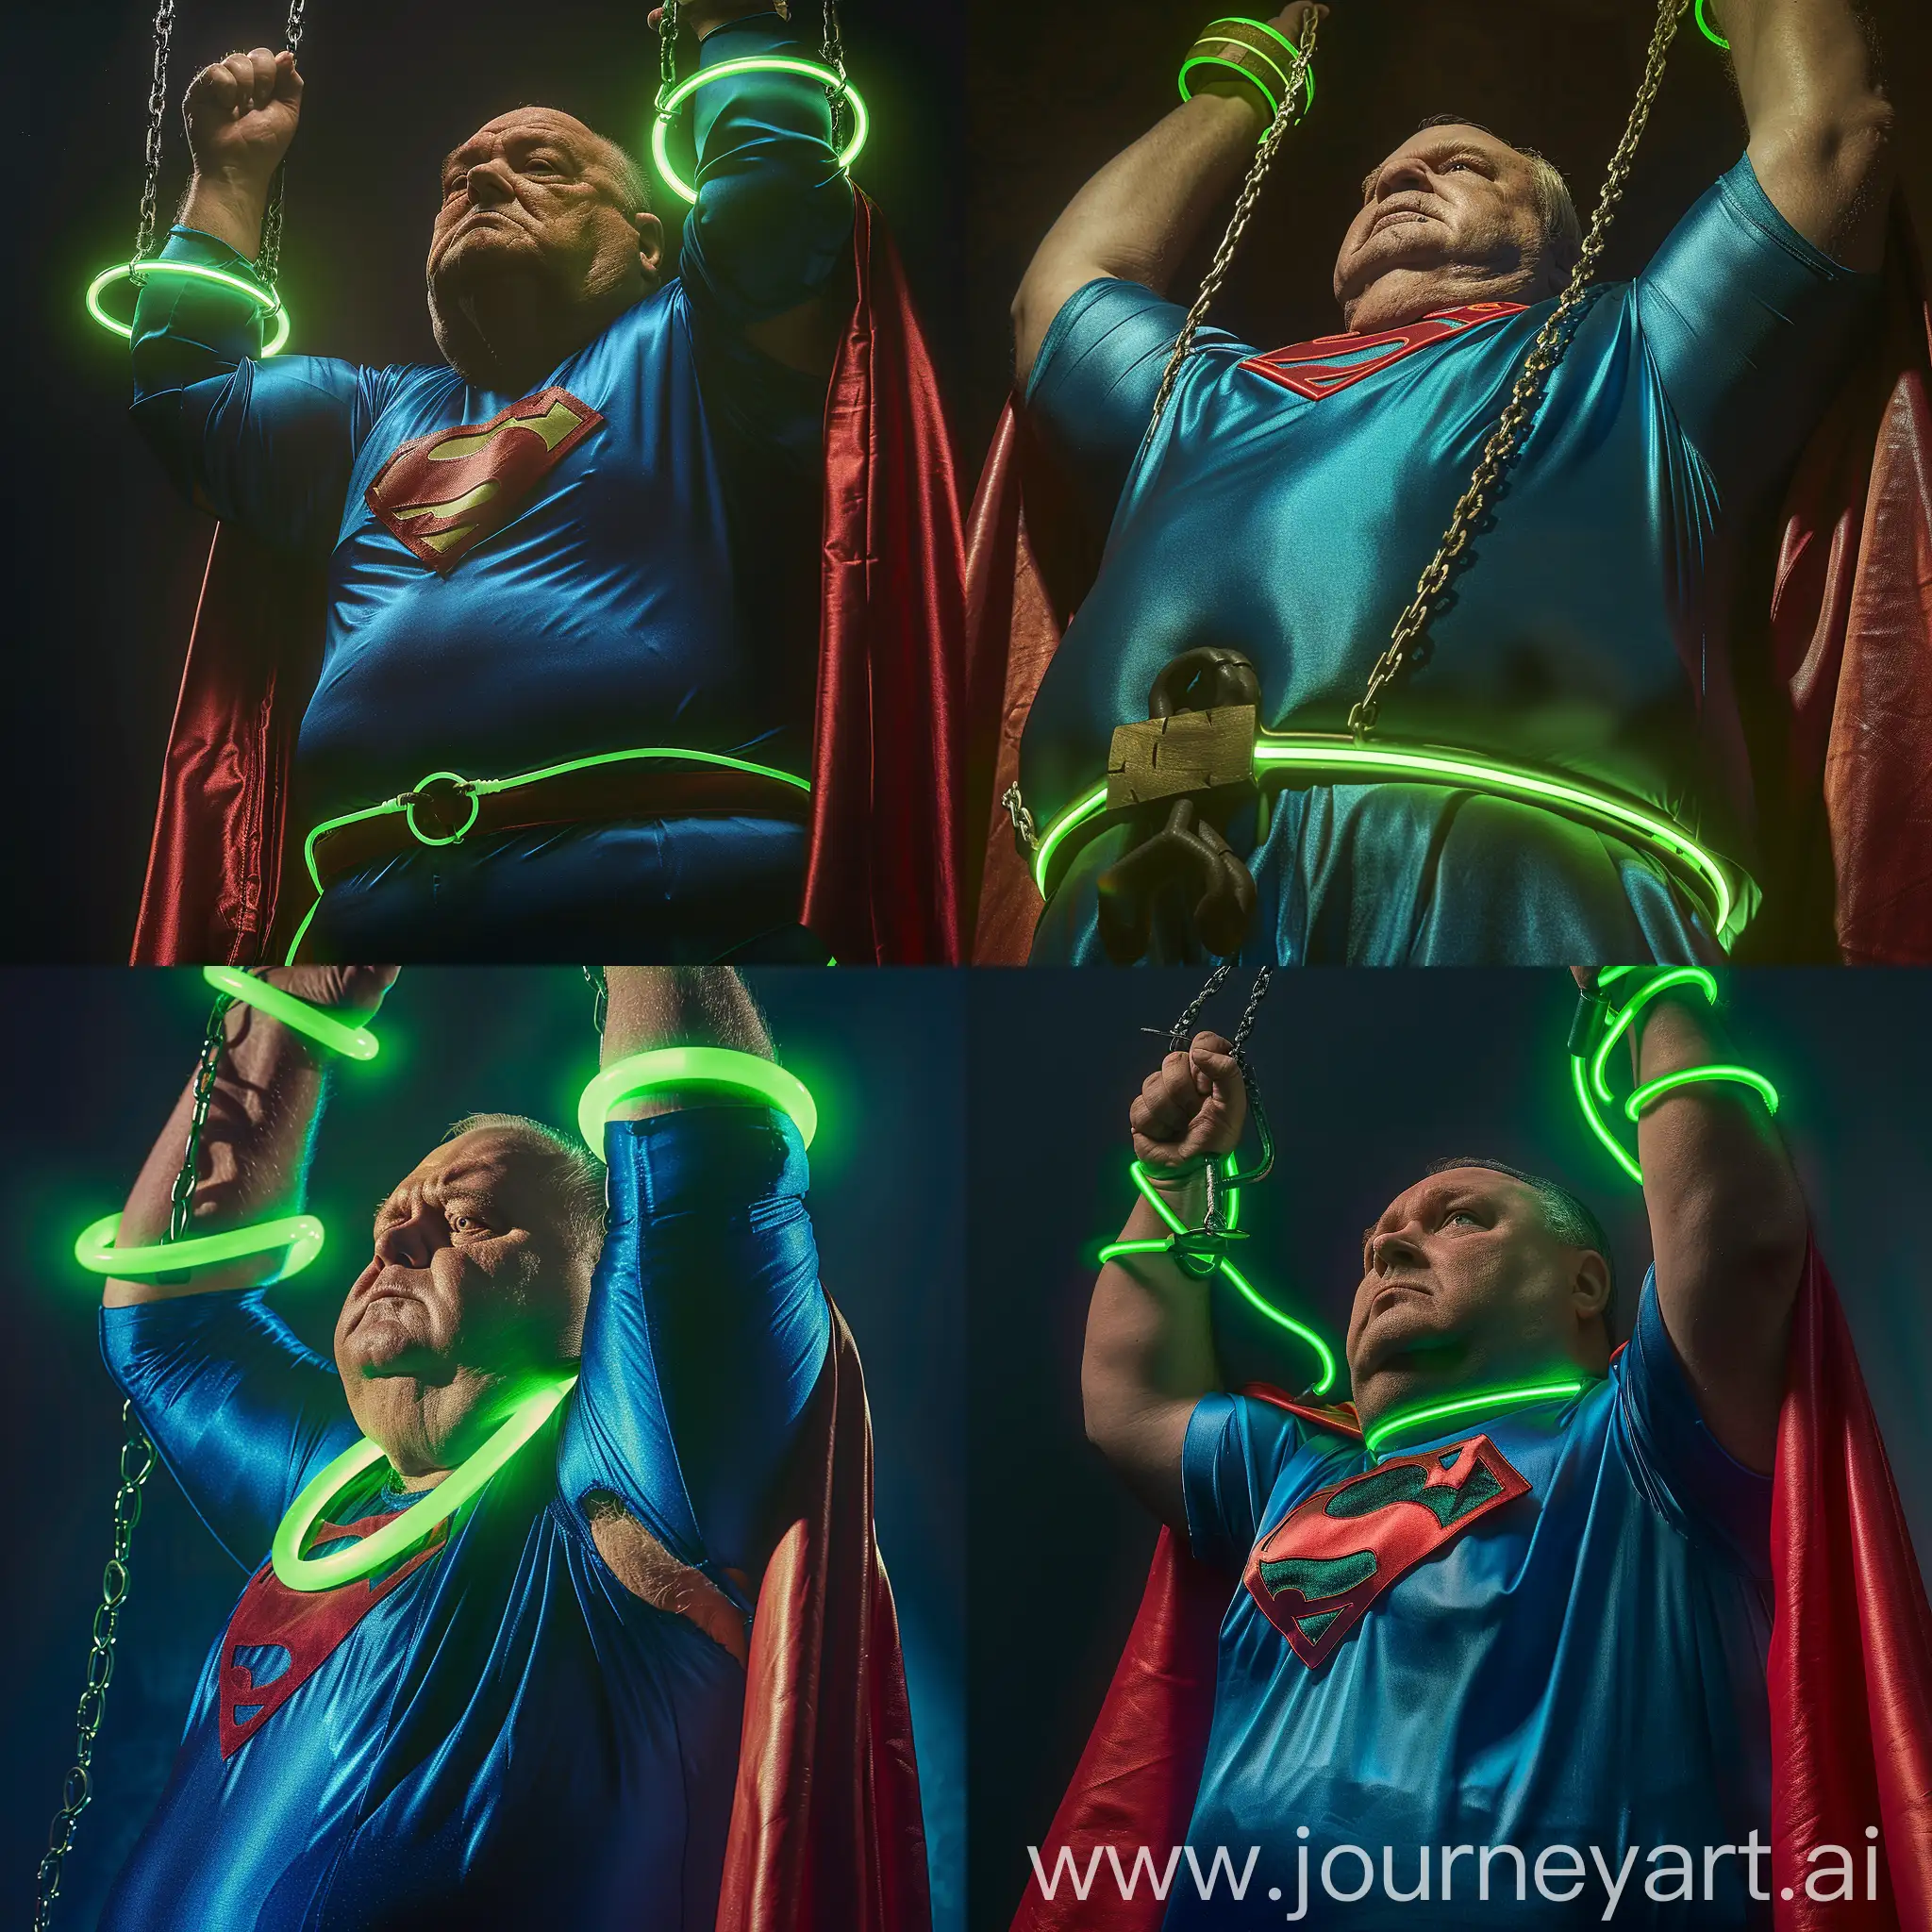 Anxious-Fat-Man-Suspended-by-Neon-Green-Shackles-in-Superman-Costume